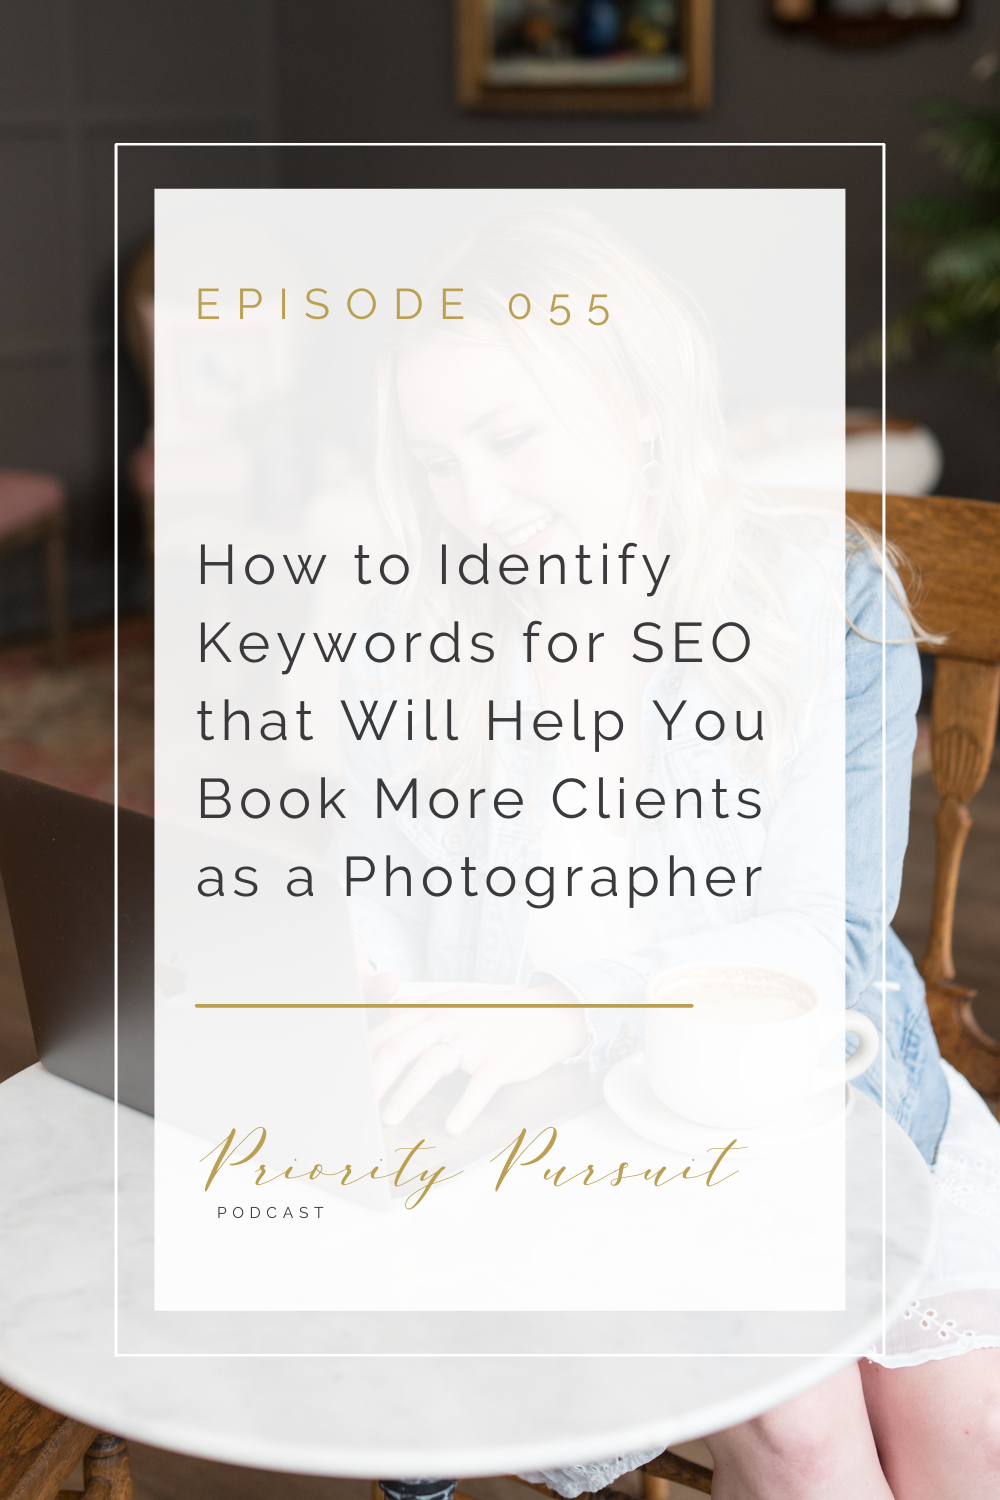 Victoria Rayburn shares how to identify keywords for SEO that will help you book more clients as a photographer in this episode of “Priority Pursuit.” 